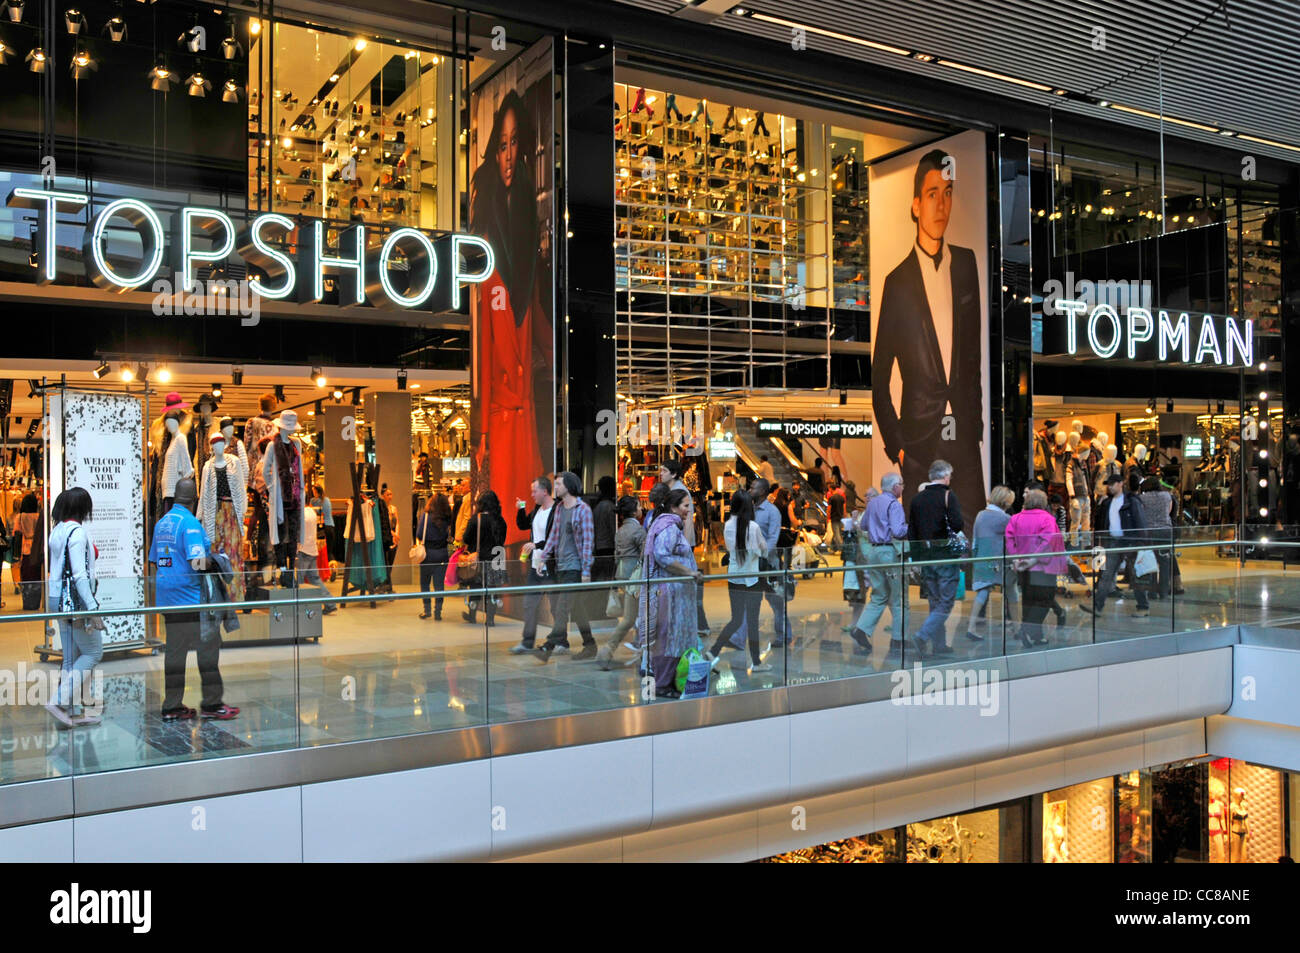 Topshop and Topman stores in the Westfield Stratford indoor shopping malls  Stock Photo - Alamy